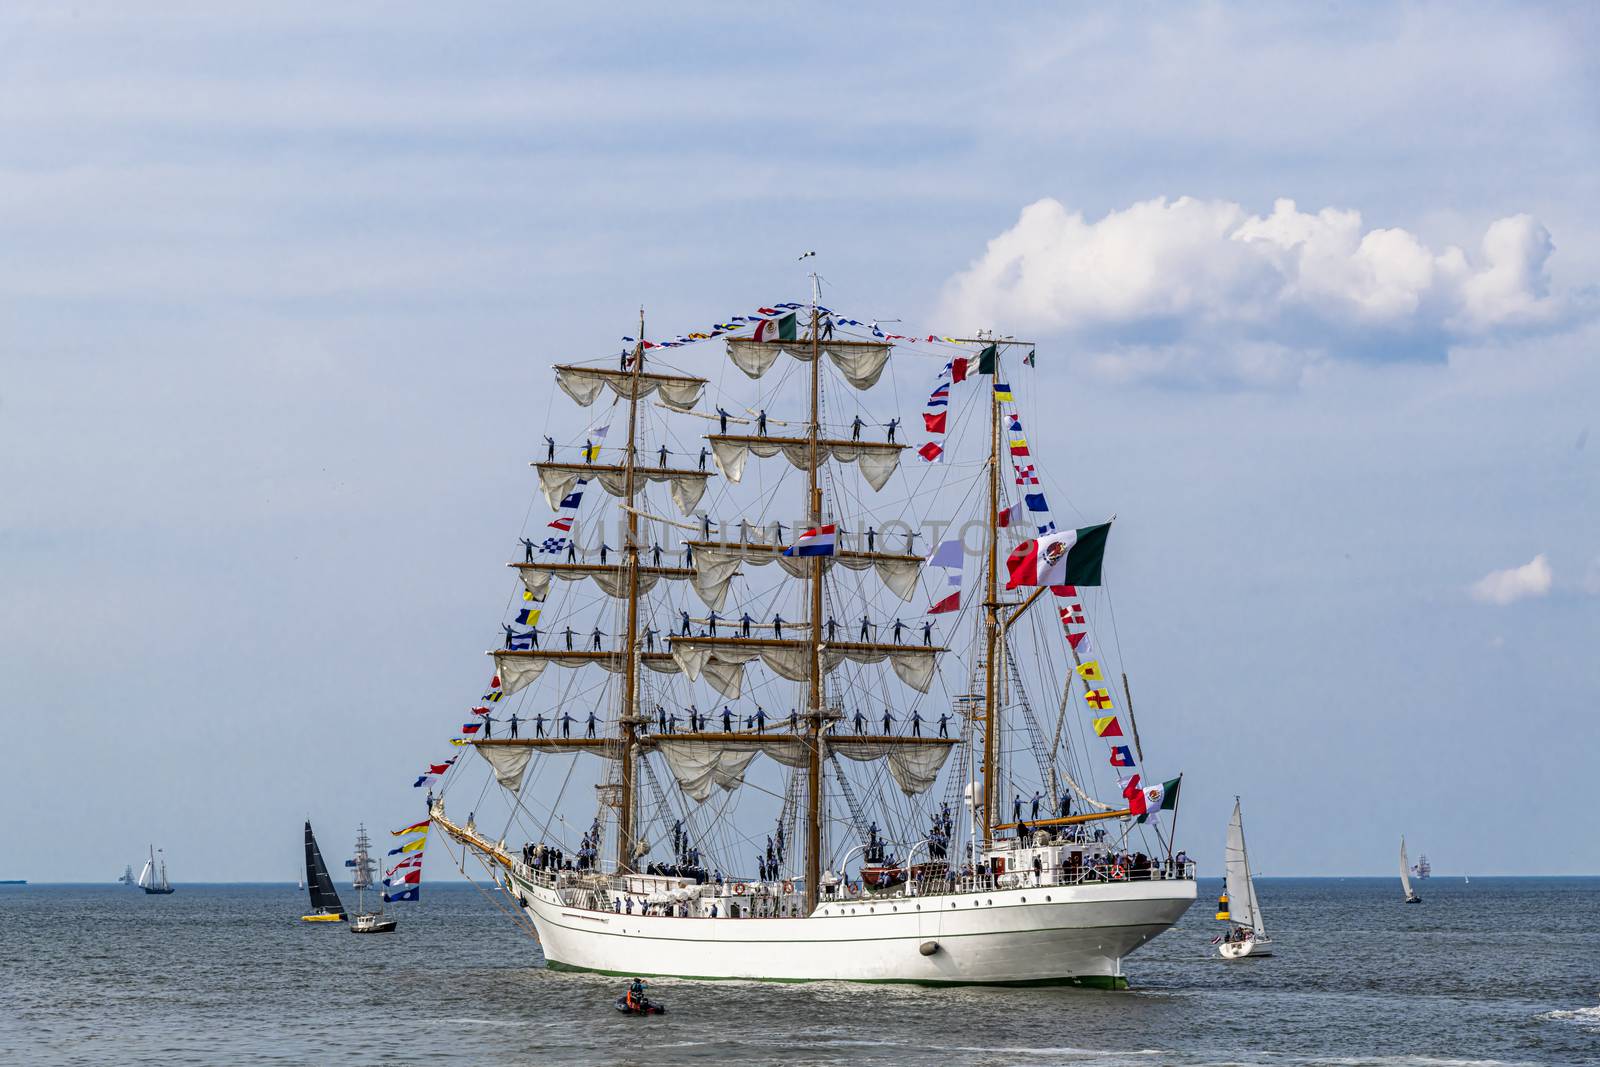 Antique tall ship, vessel leaving the harbor of The Hague, Scheveningen under a sunny and blue sky by ankorlight